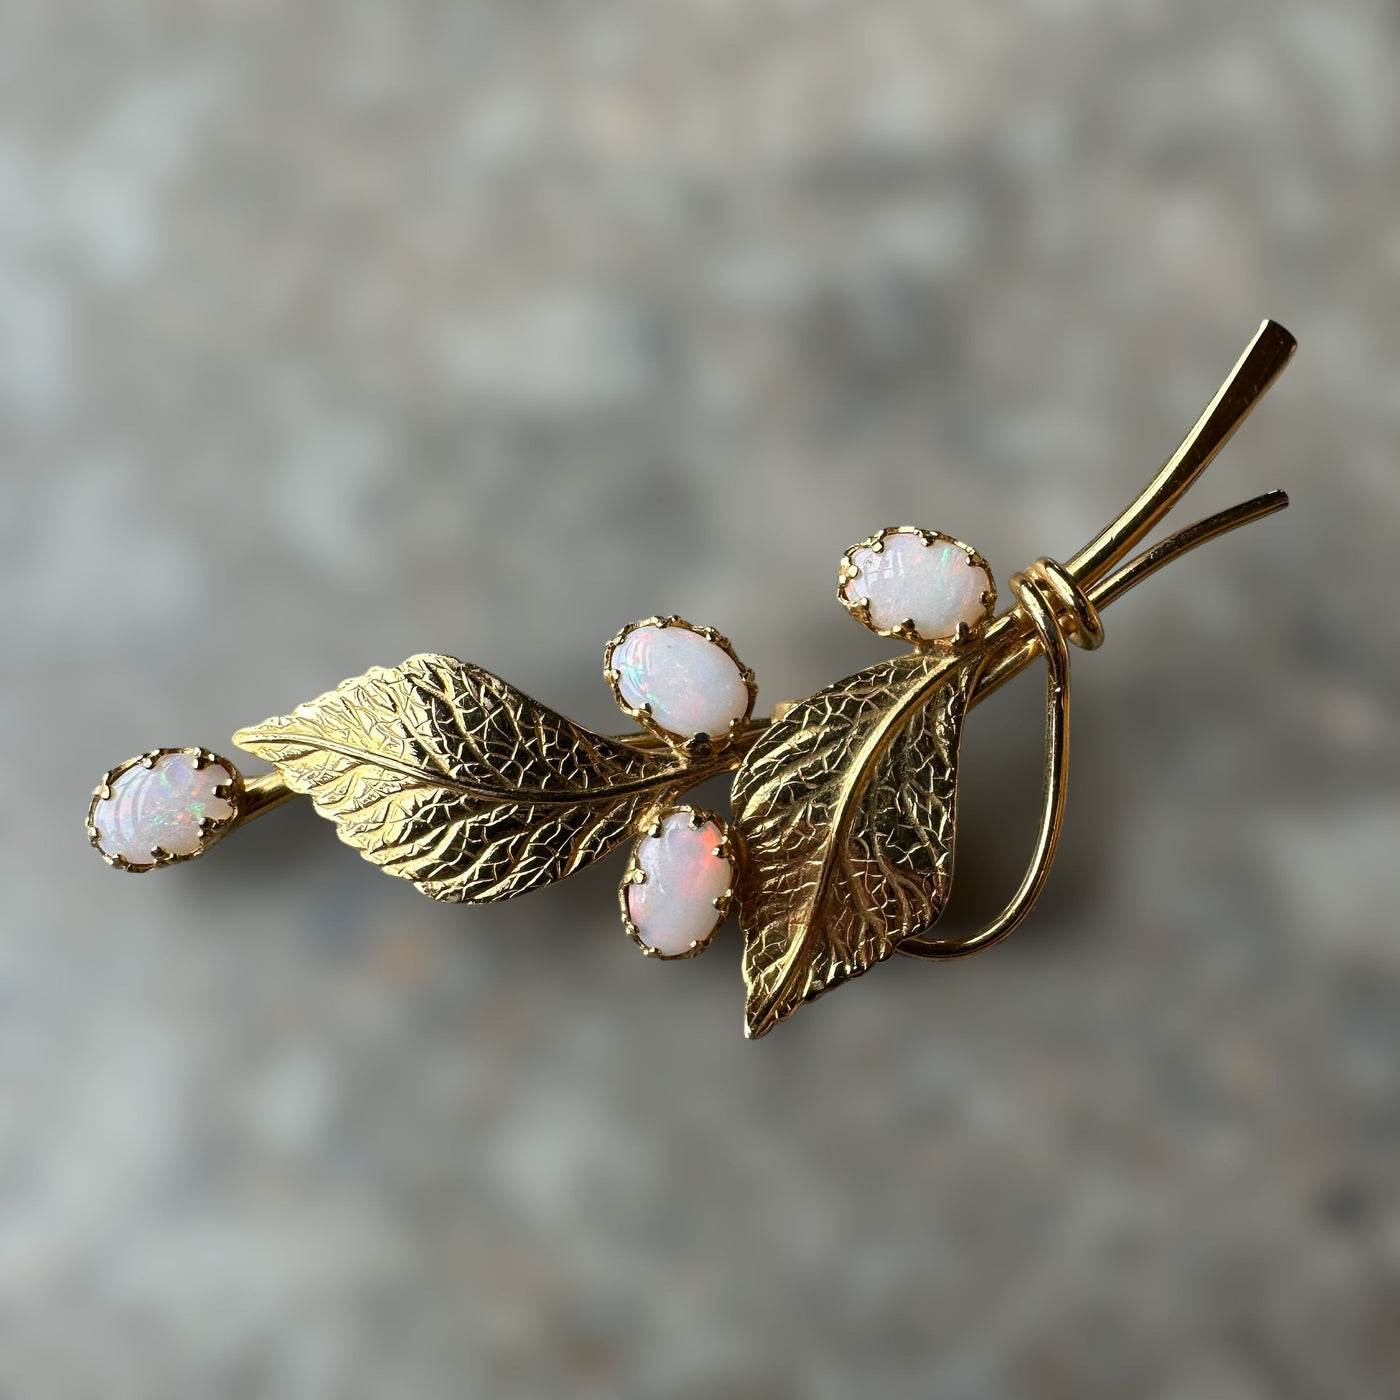 vintage 14 karat gold-filled floral brooch with 4 gorgeous natural opal cabochons, circa 1940s!